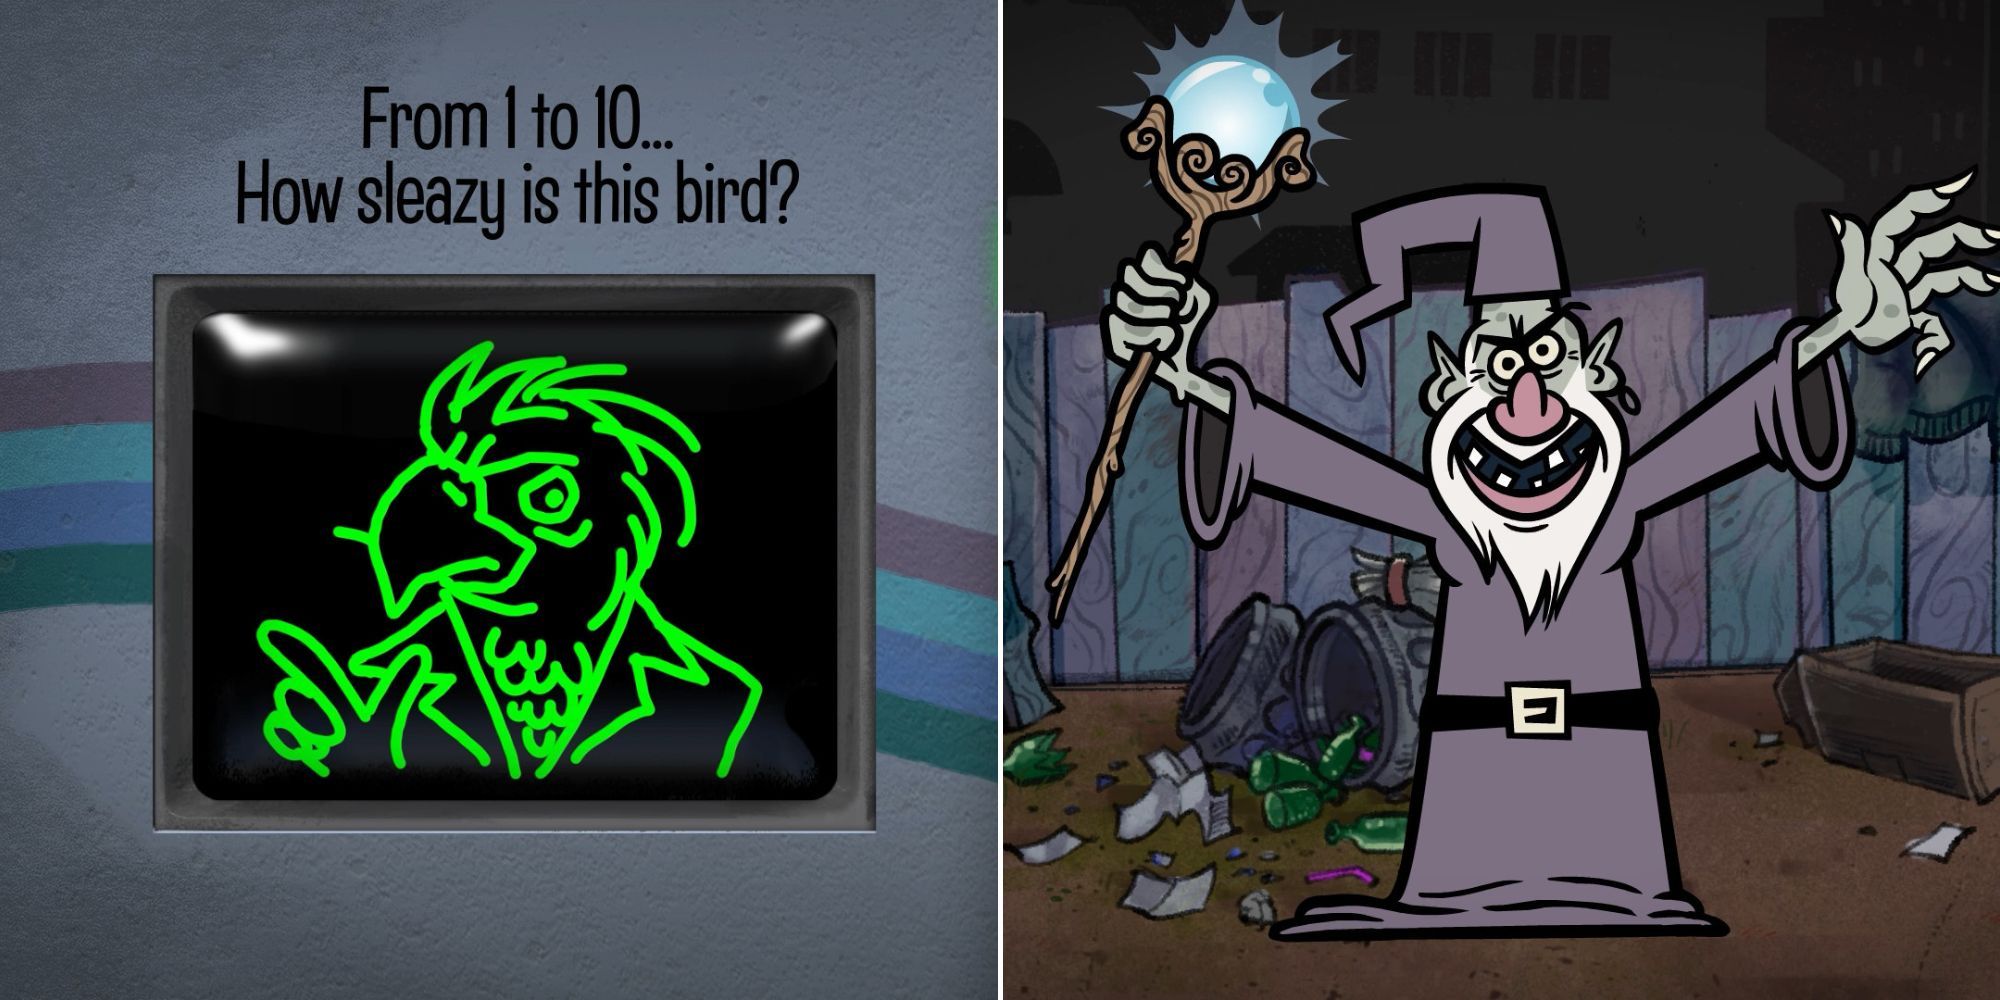 Ranking The Sleaziness Of A Bird In Nonsensory And The Junk Wizard Of Junktopia In The Jackbox Party Pack 9